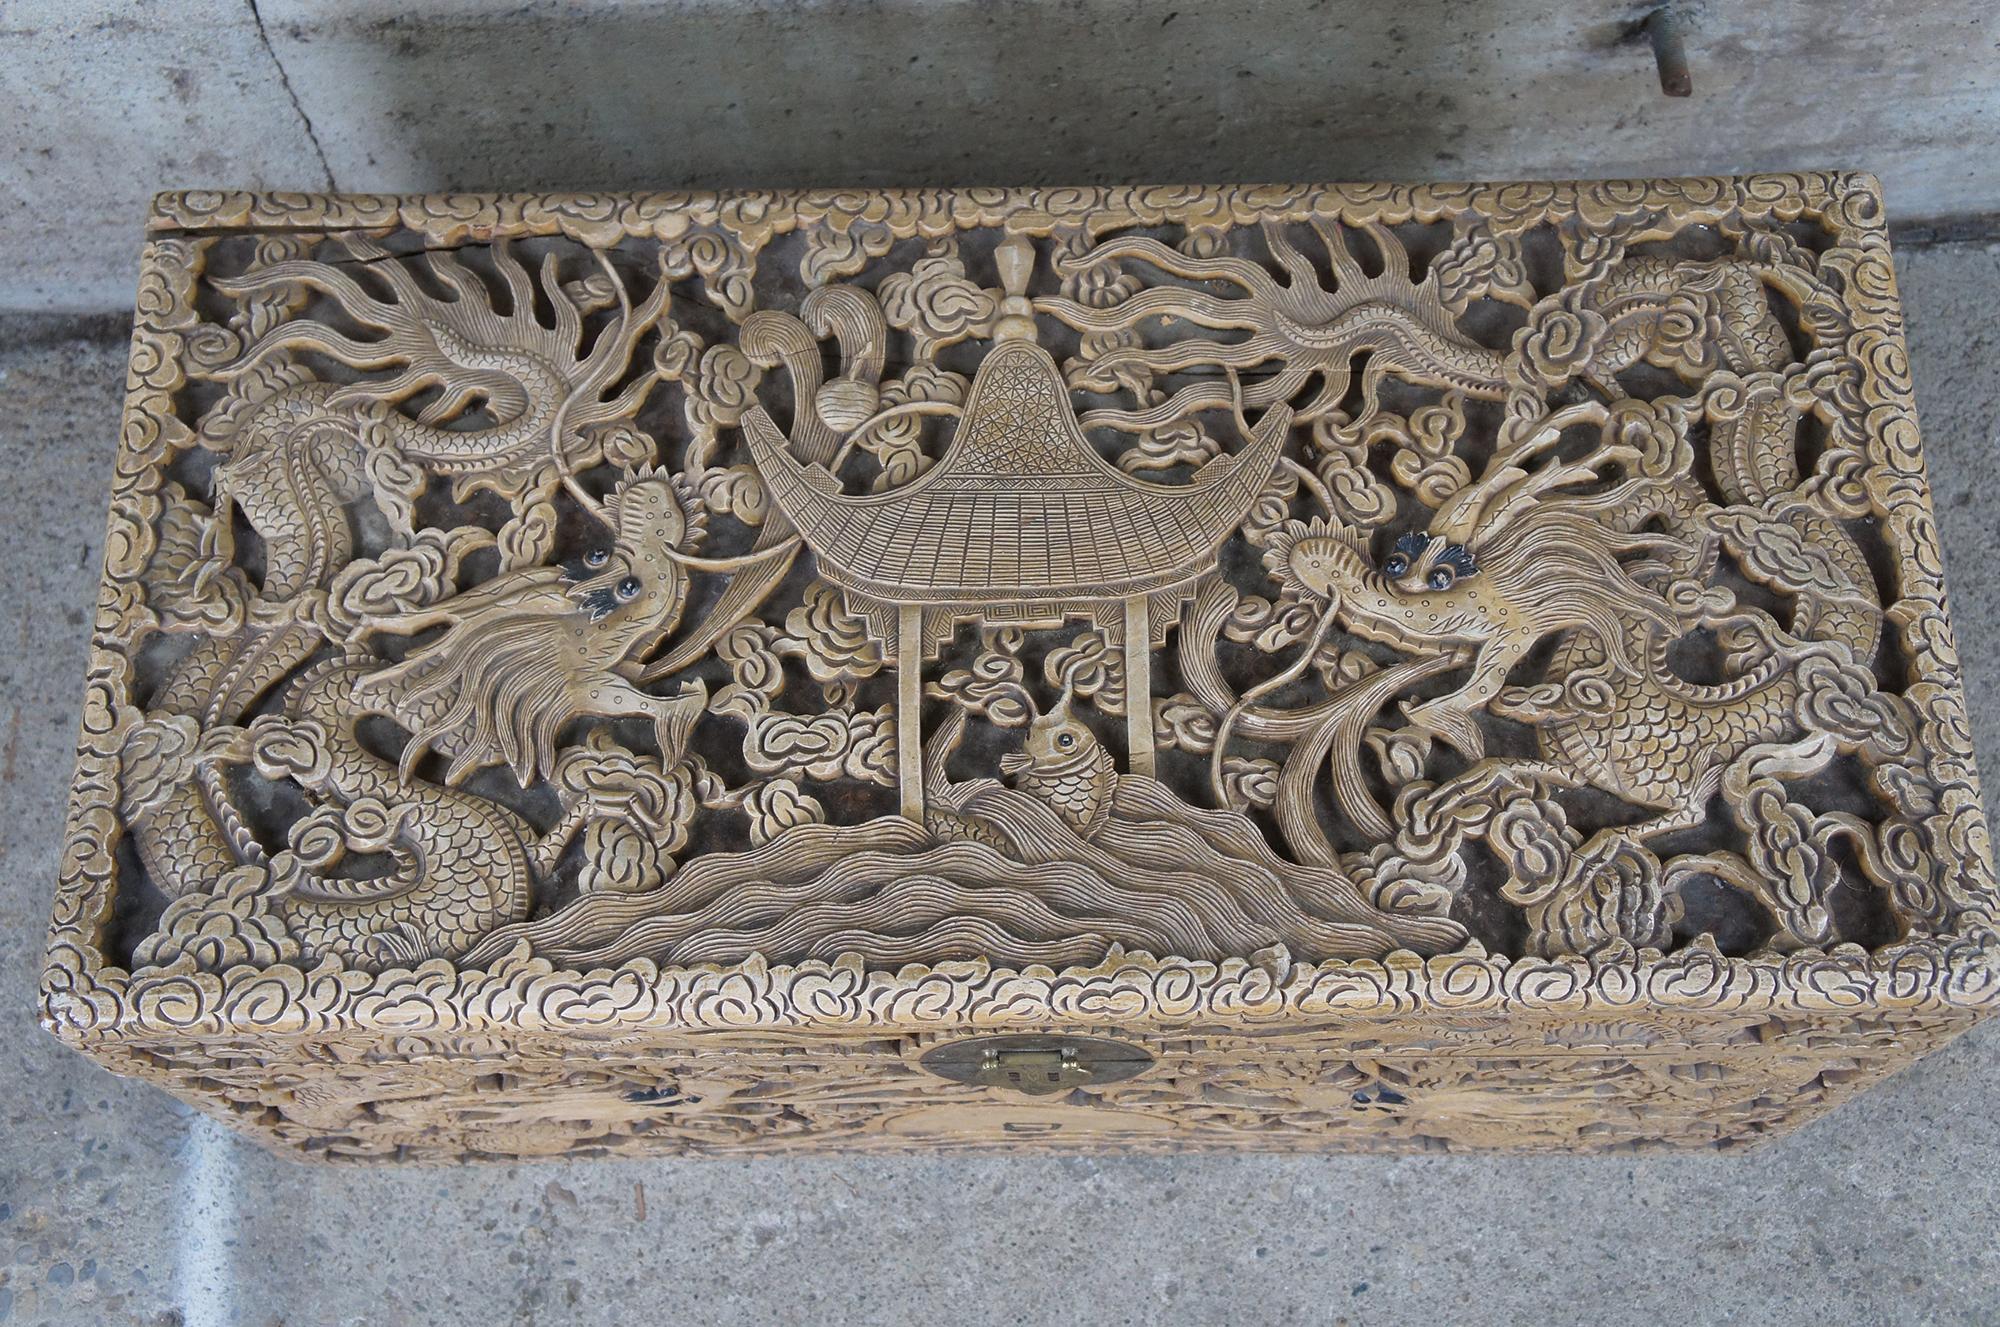 20th Century Rare Antique Chinese Chinoiserie Carved Dragon High Relief Camphor Chest Trunk